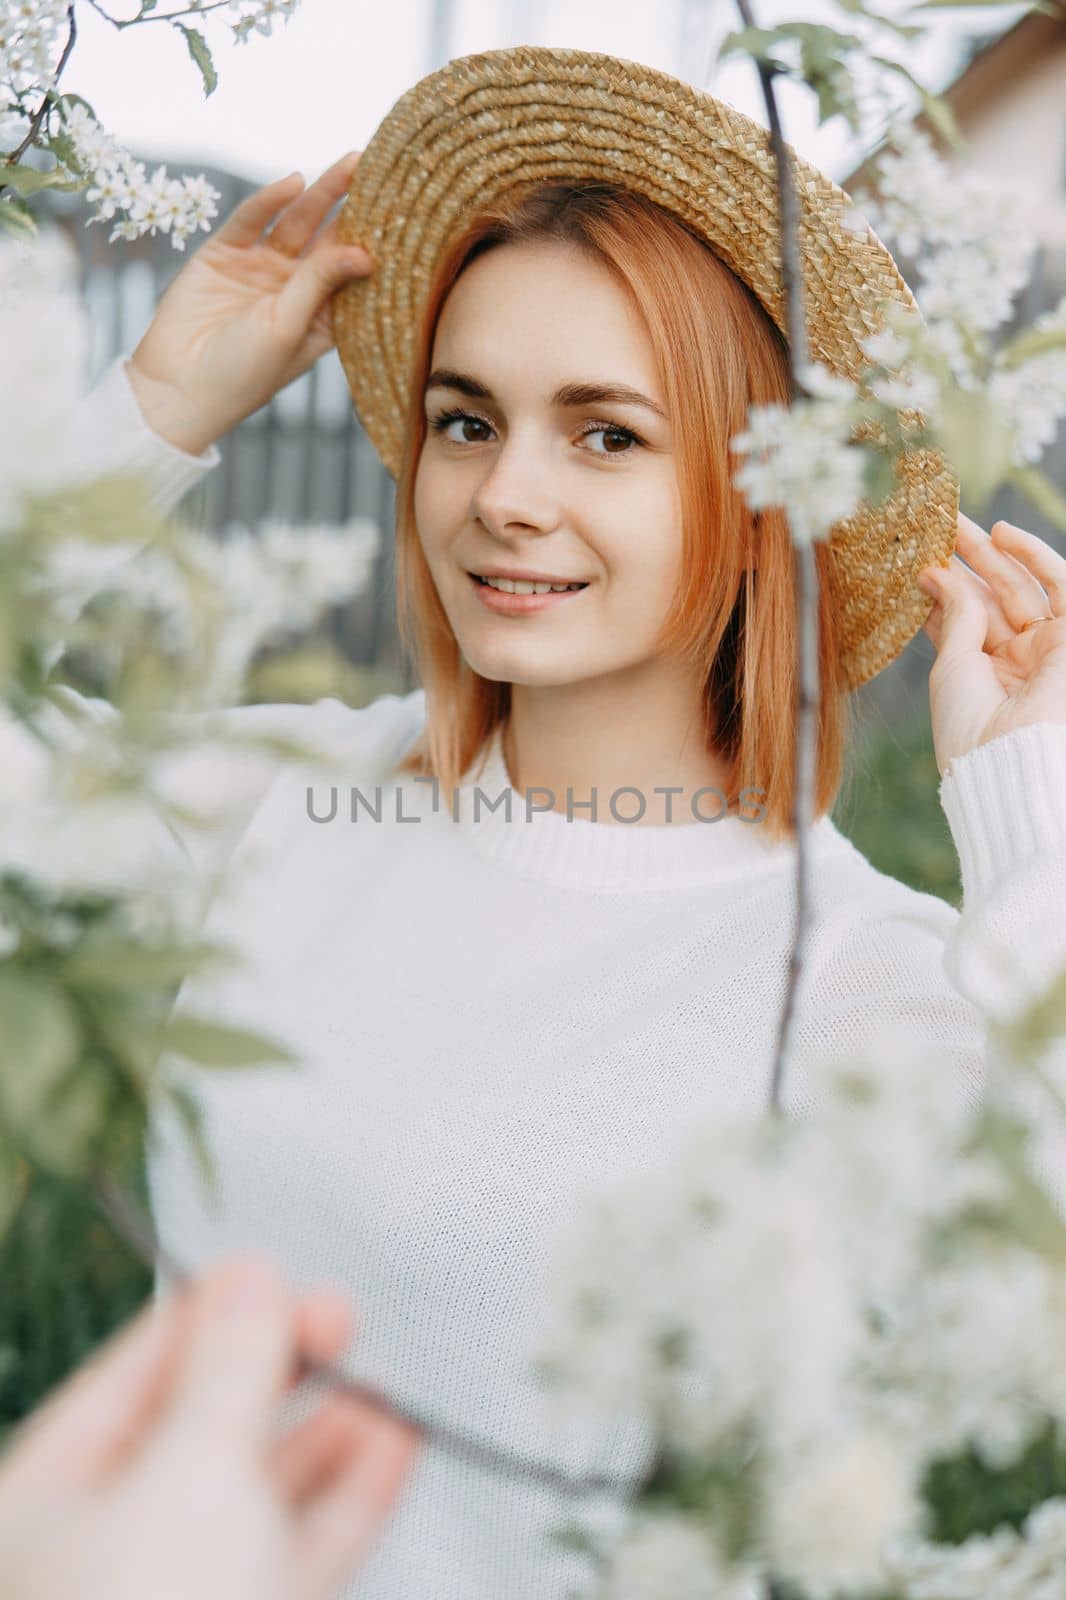 Portrait of a woman in a straw hat in a cherry blossom. Free outdoor recreation, spring blooming garden. by Annu1tochka